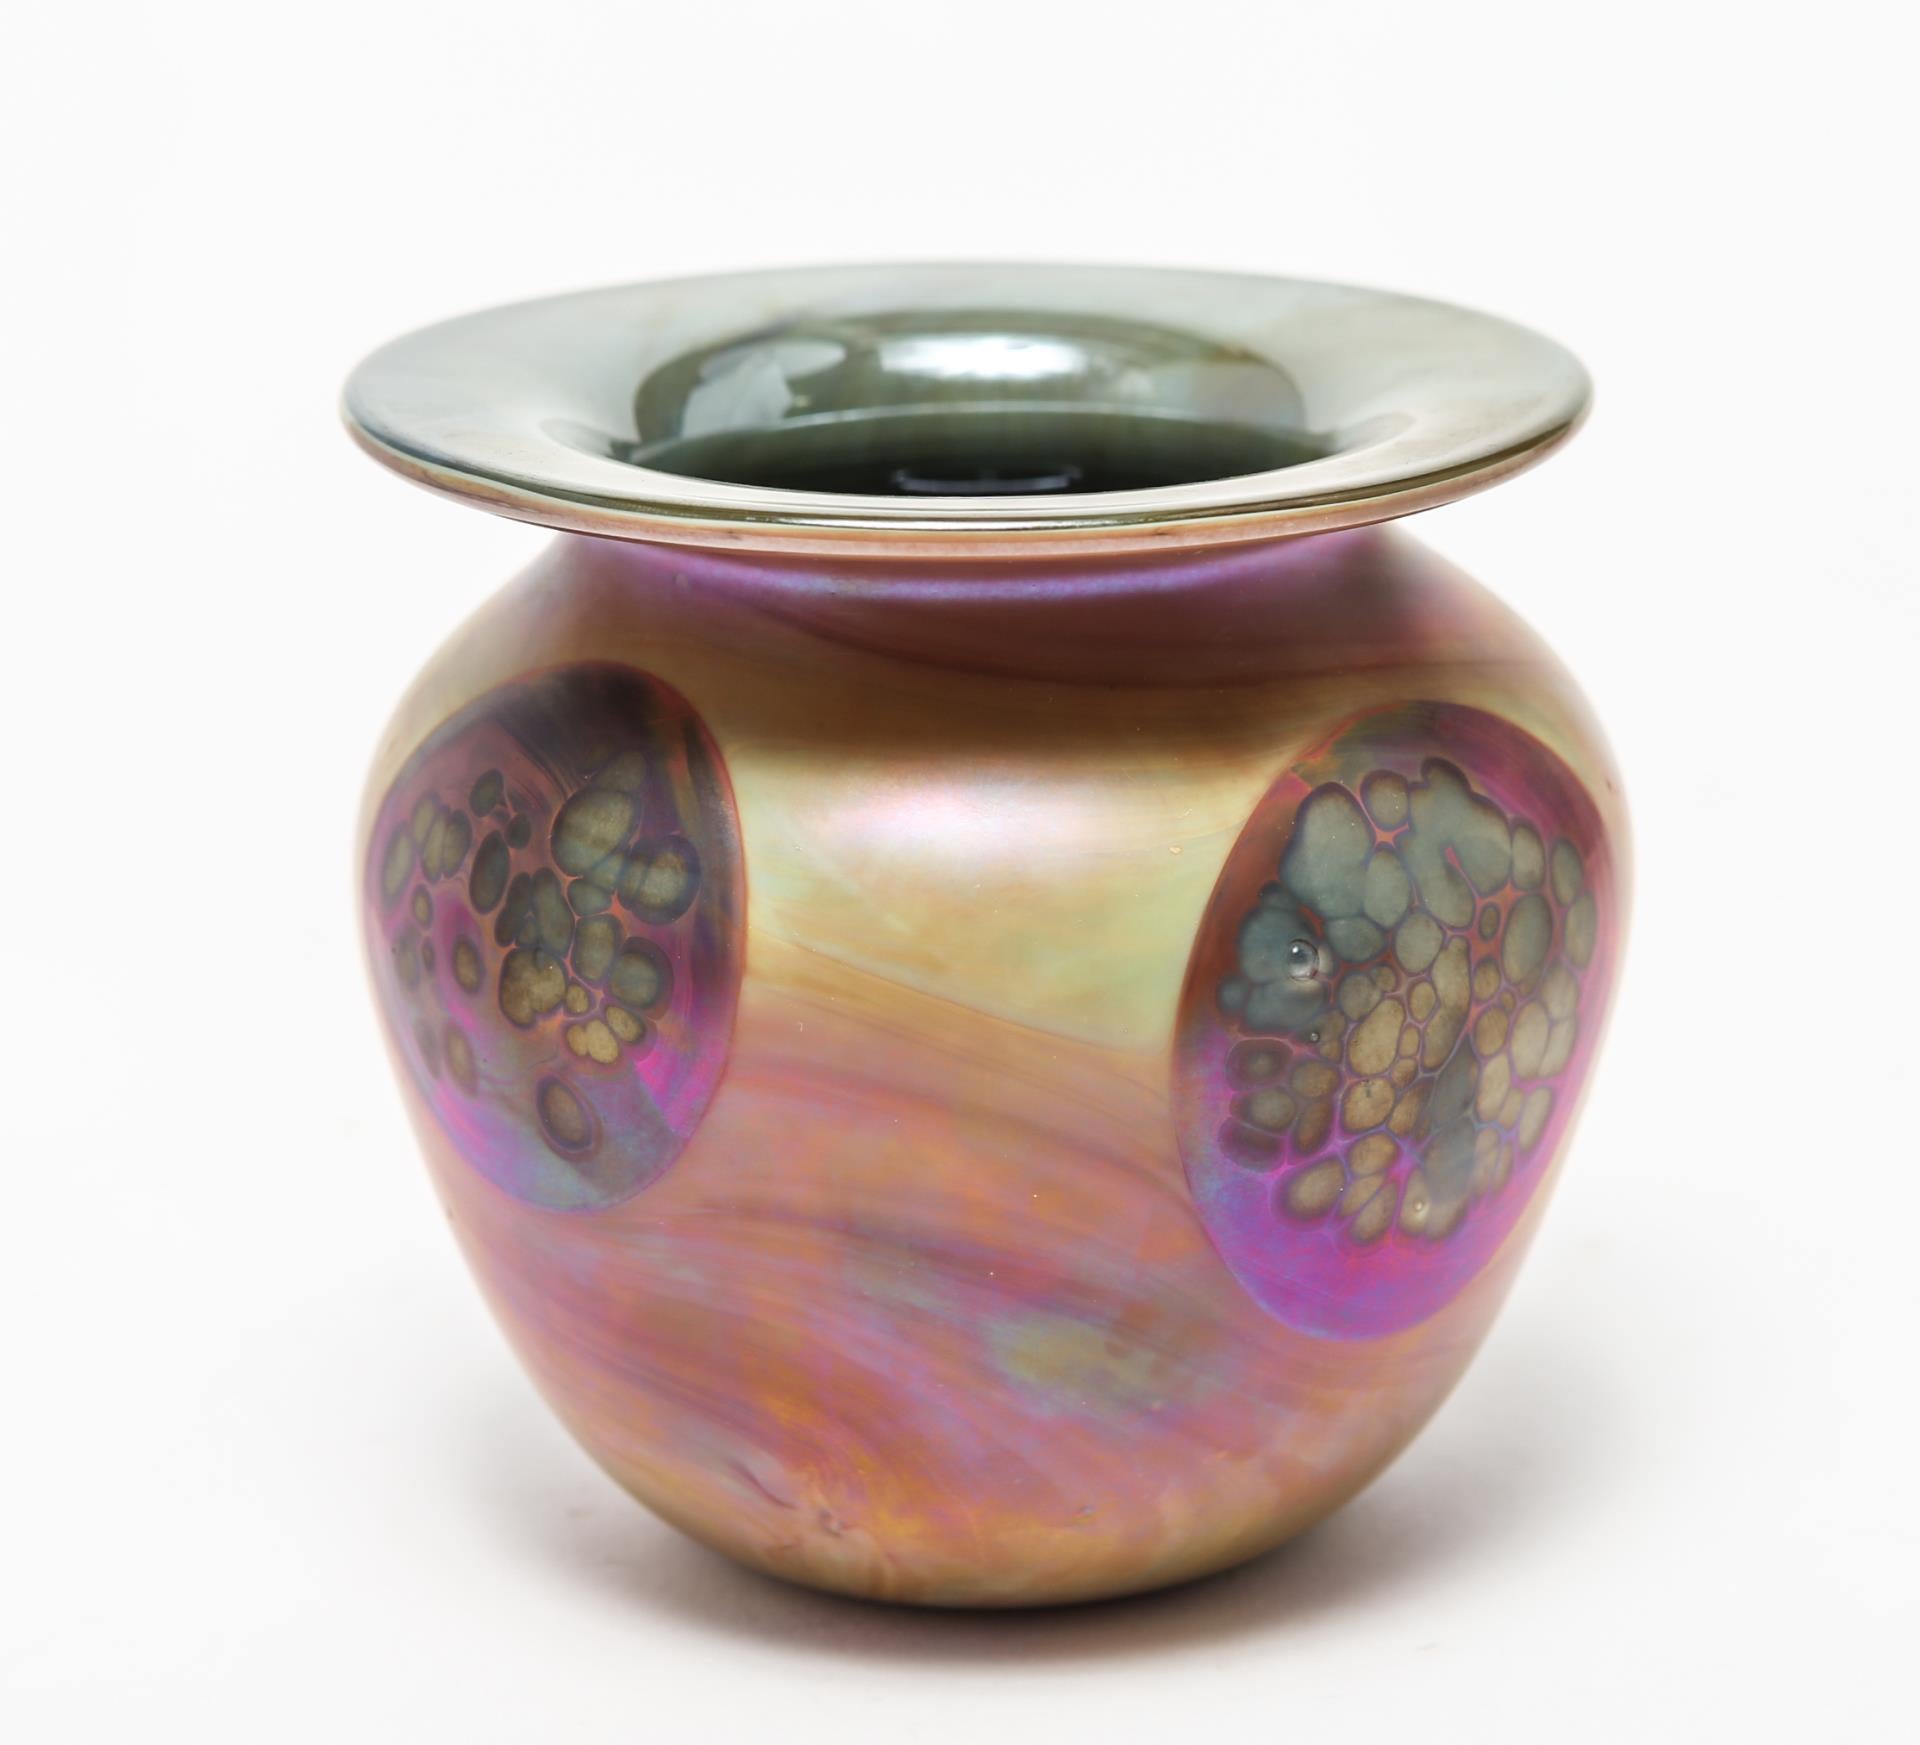 American modern art glass vase made by Donald Carlson in swirled orange and pink luster glass with circular medallions. The piece has an etched signature underneath and is marked 